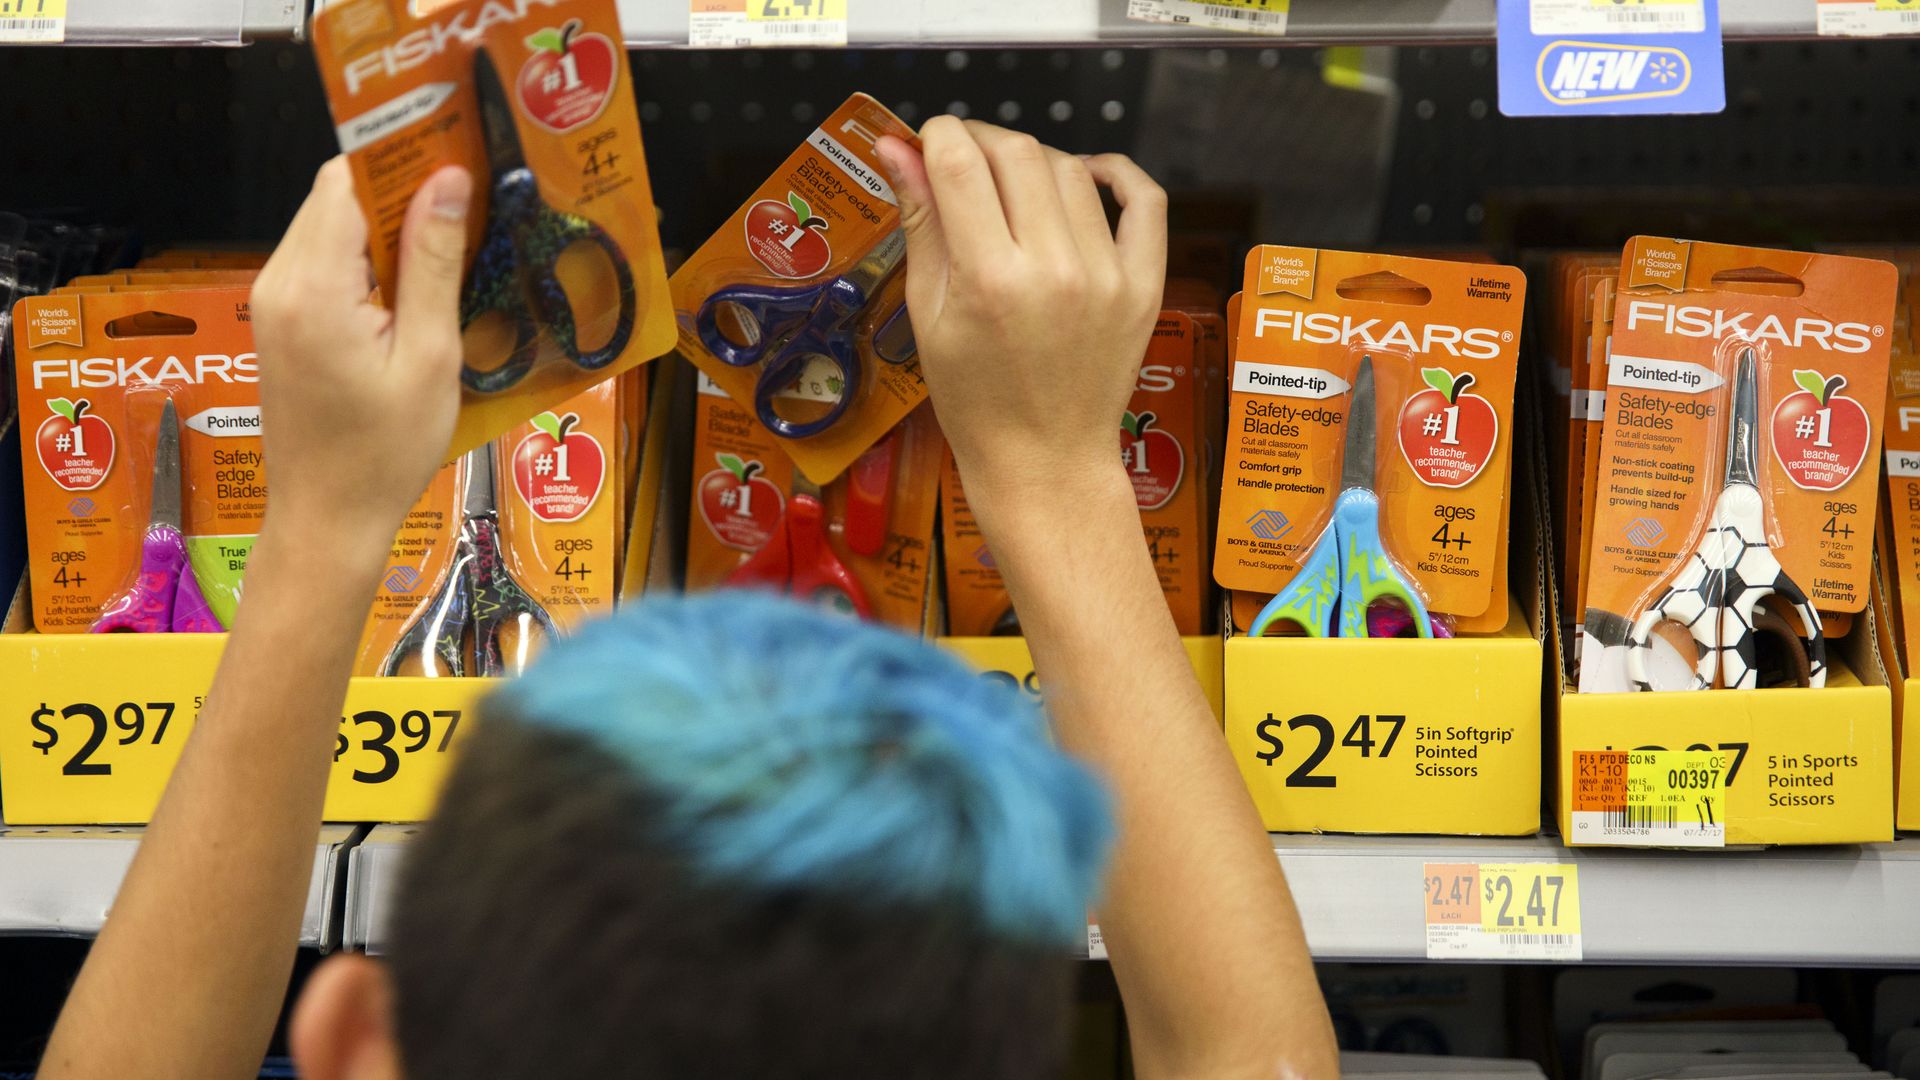 Kid with blue hair reaching for scissors 